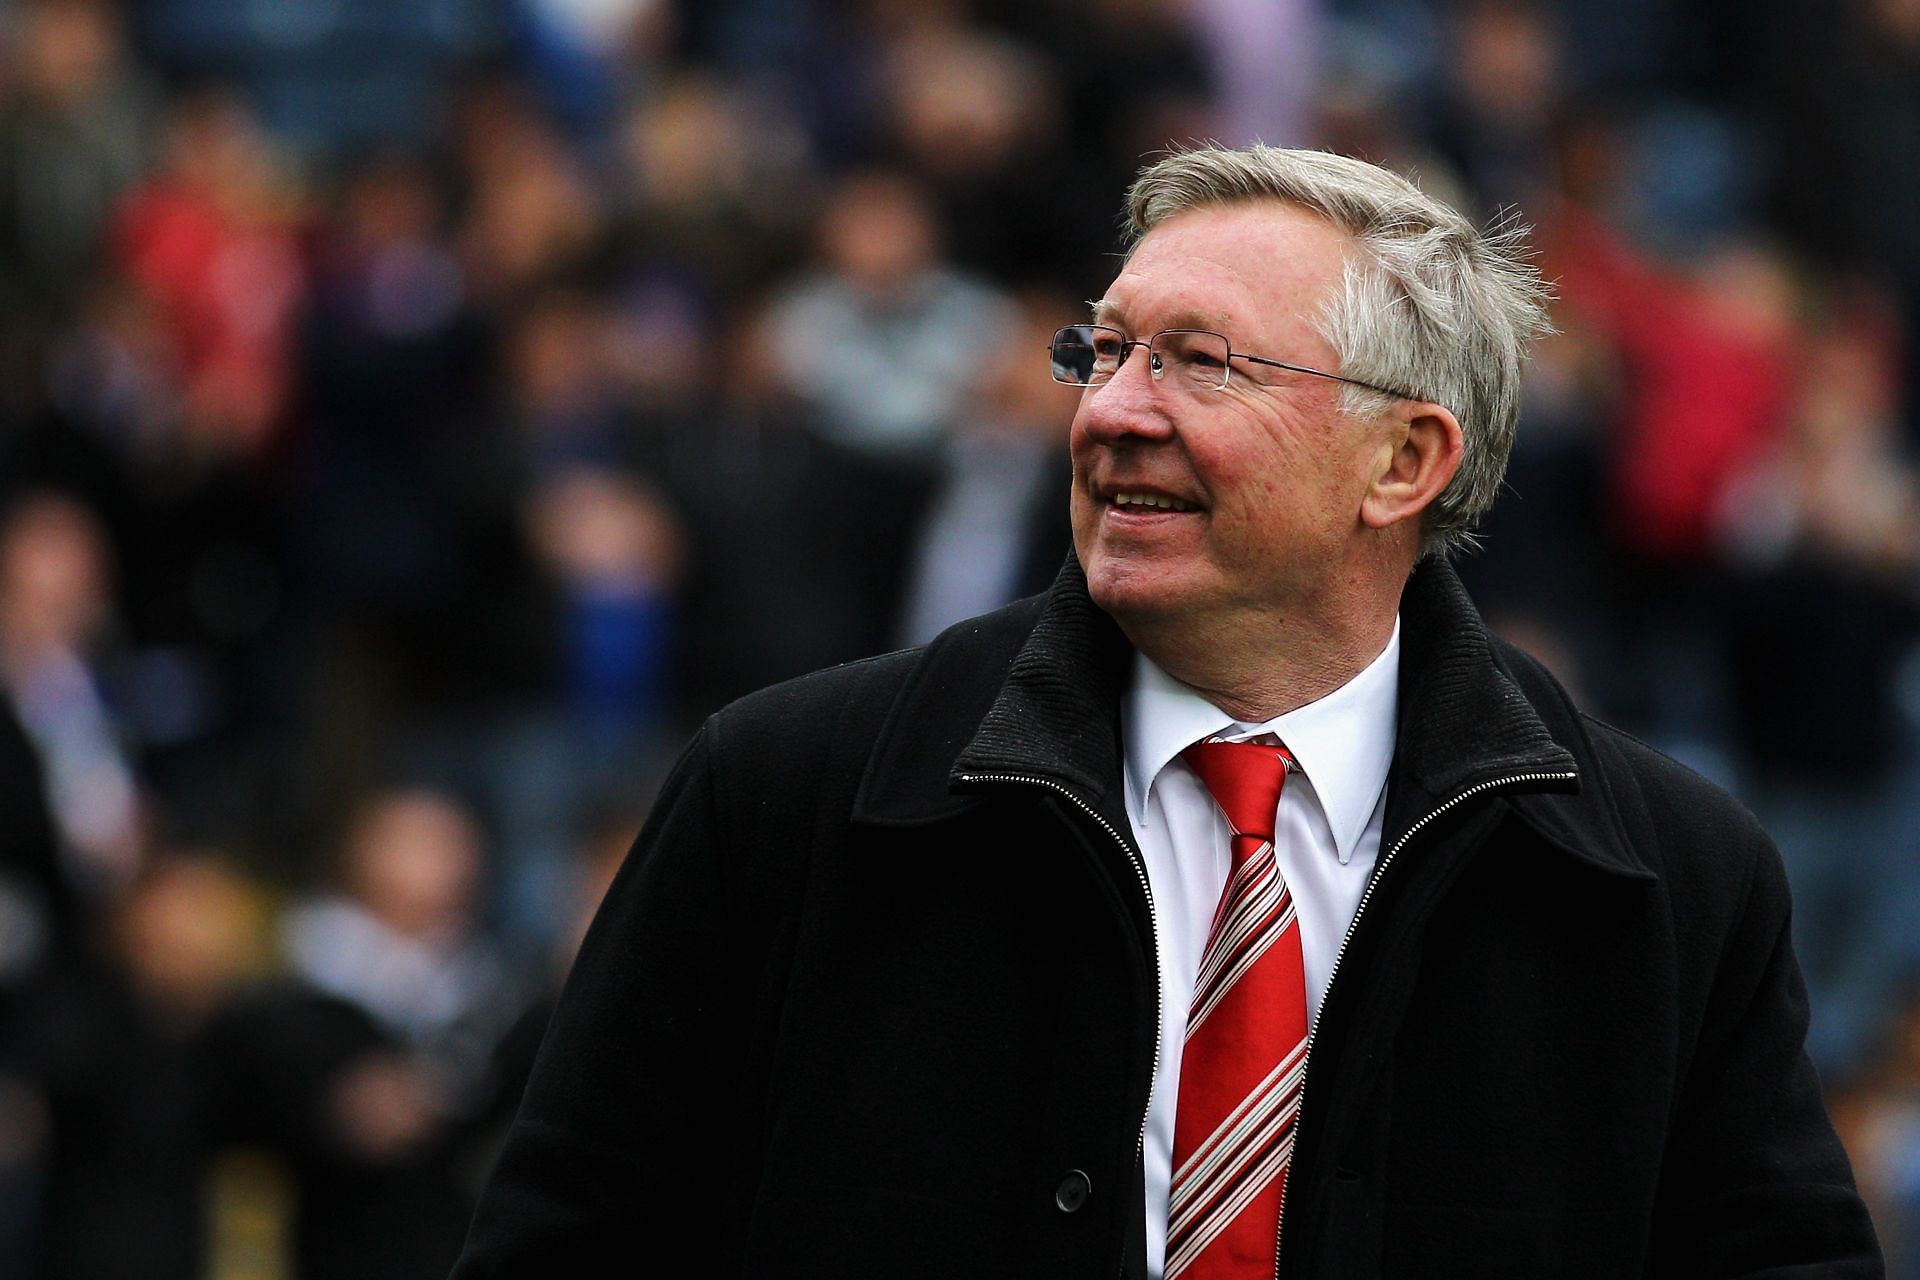 Sir Alex Ferguson is the most successful manager in Premier League history.